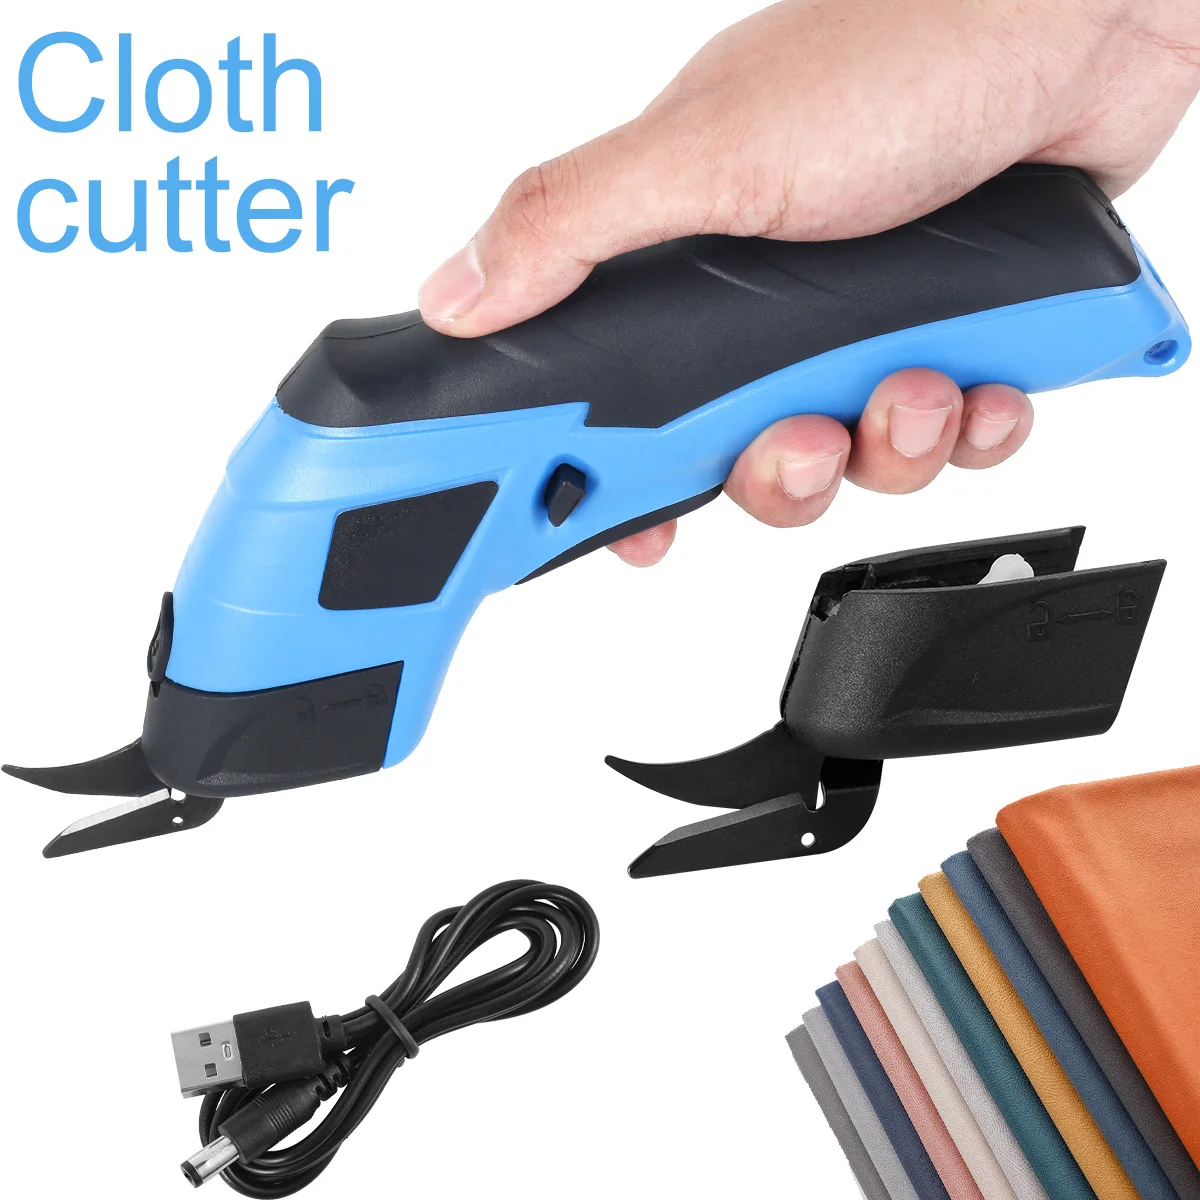 

Cordless Electric Scissors with 2 Blades 3.6V 10000RPM Electric Mini Cutter USB Rechargeable Power Hand Shears Cutter Portable